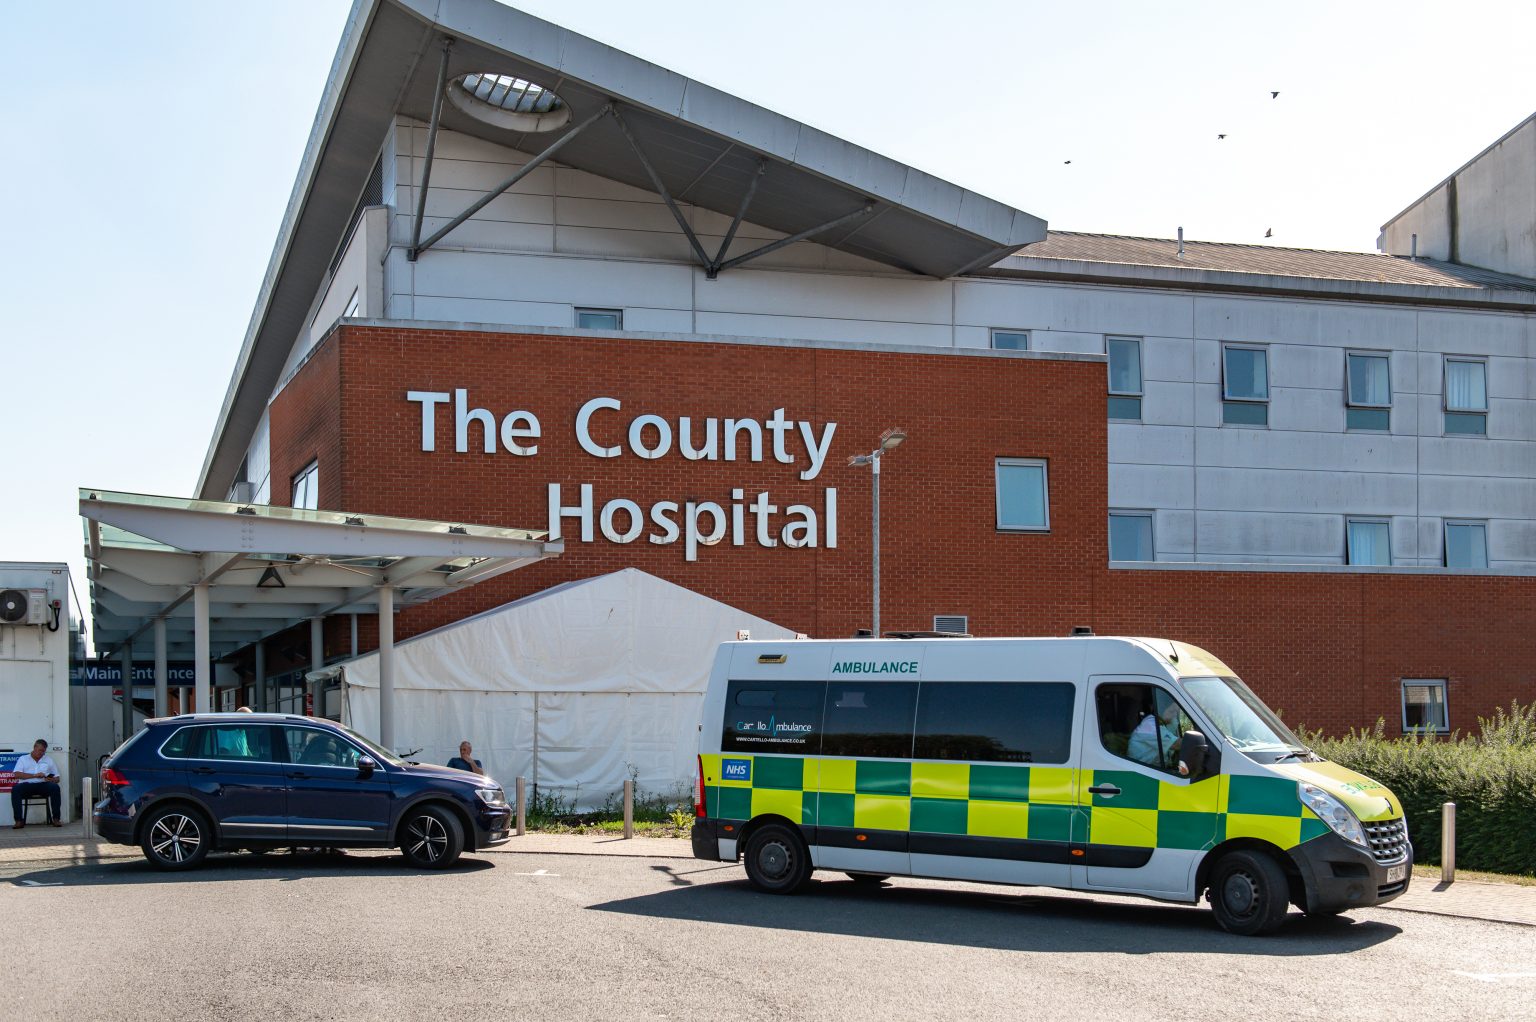 NEWS | Latest data shows huge fall in the number of patients with COVID-19 at hospitals in Herefordshire